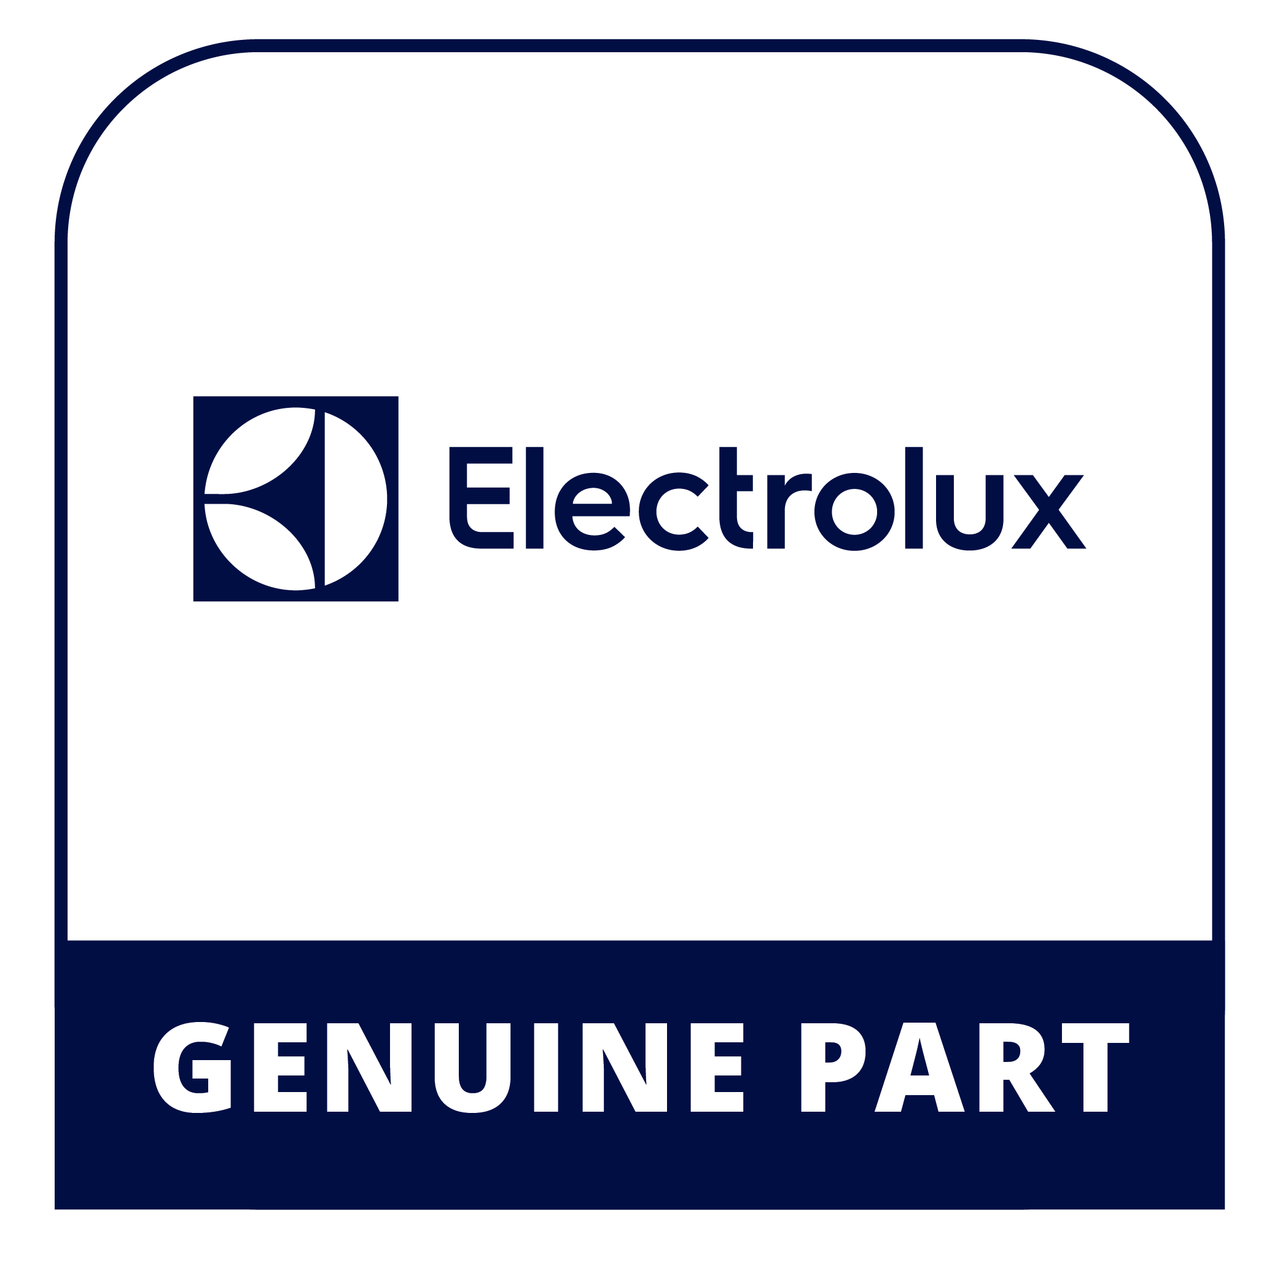 Frigidaire - Electrolux 318200629 Use & Care Guide - Genuine Electrolux Part